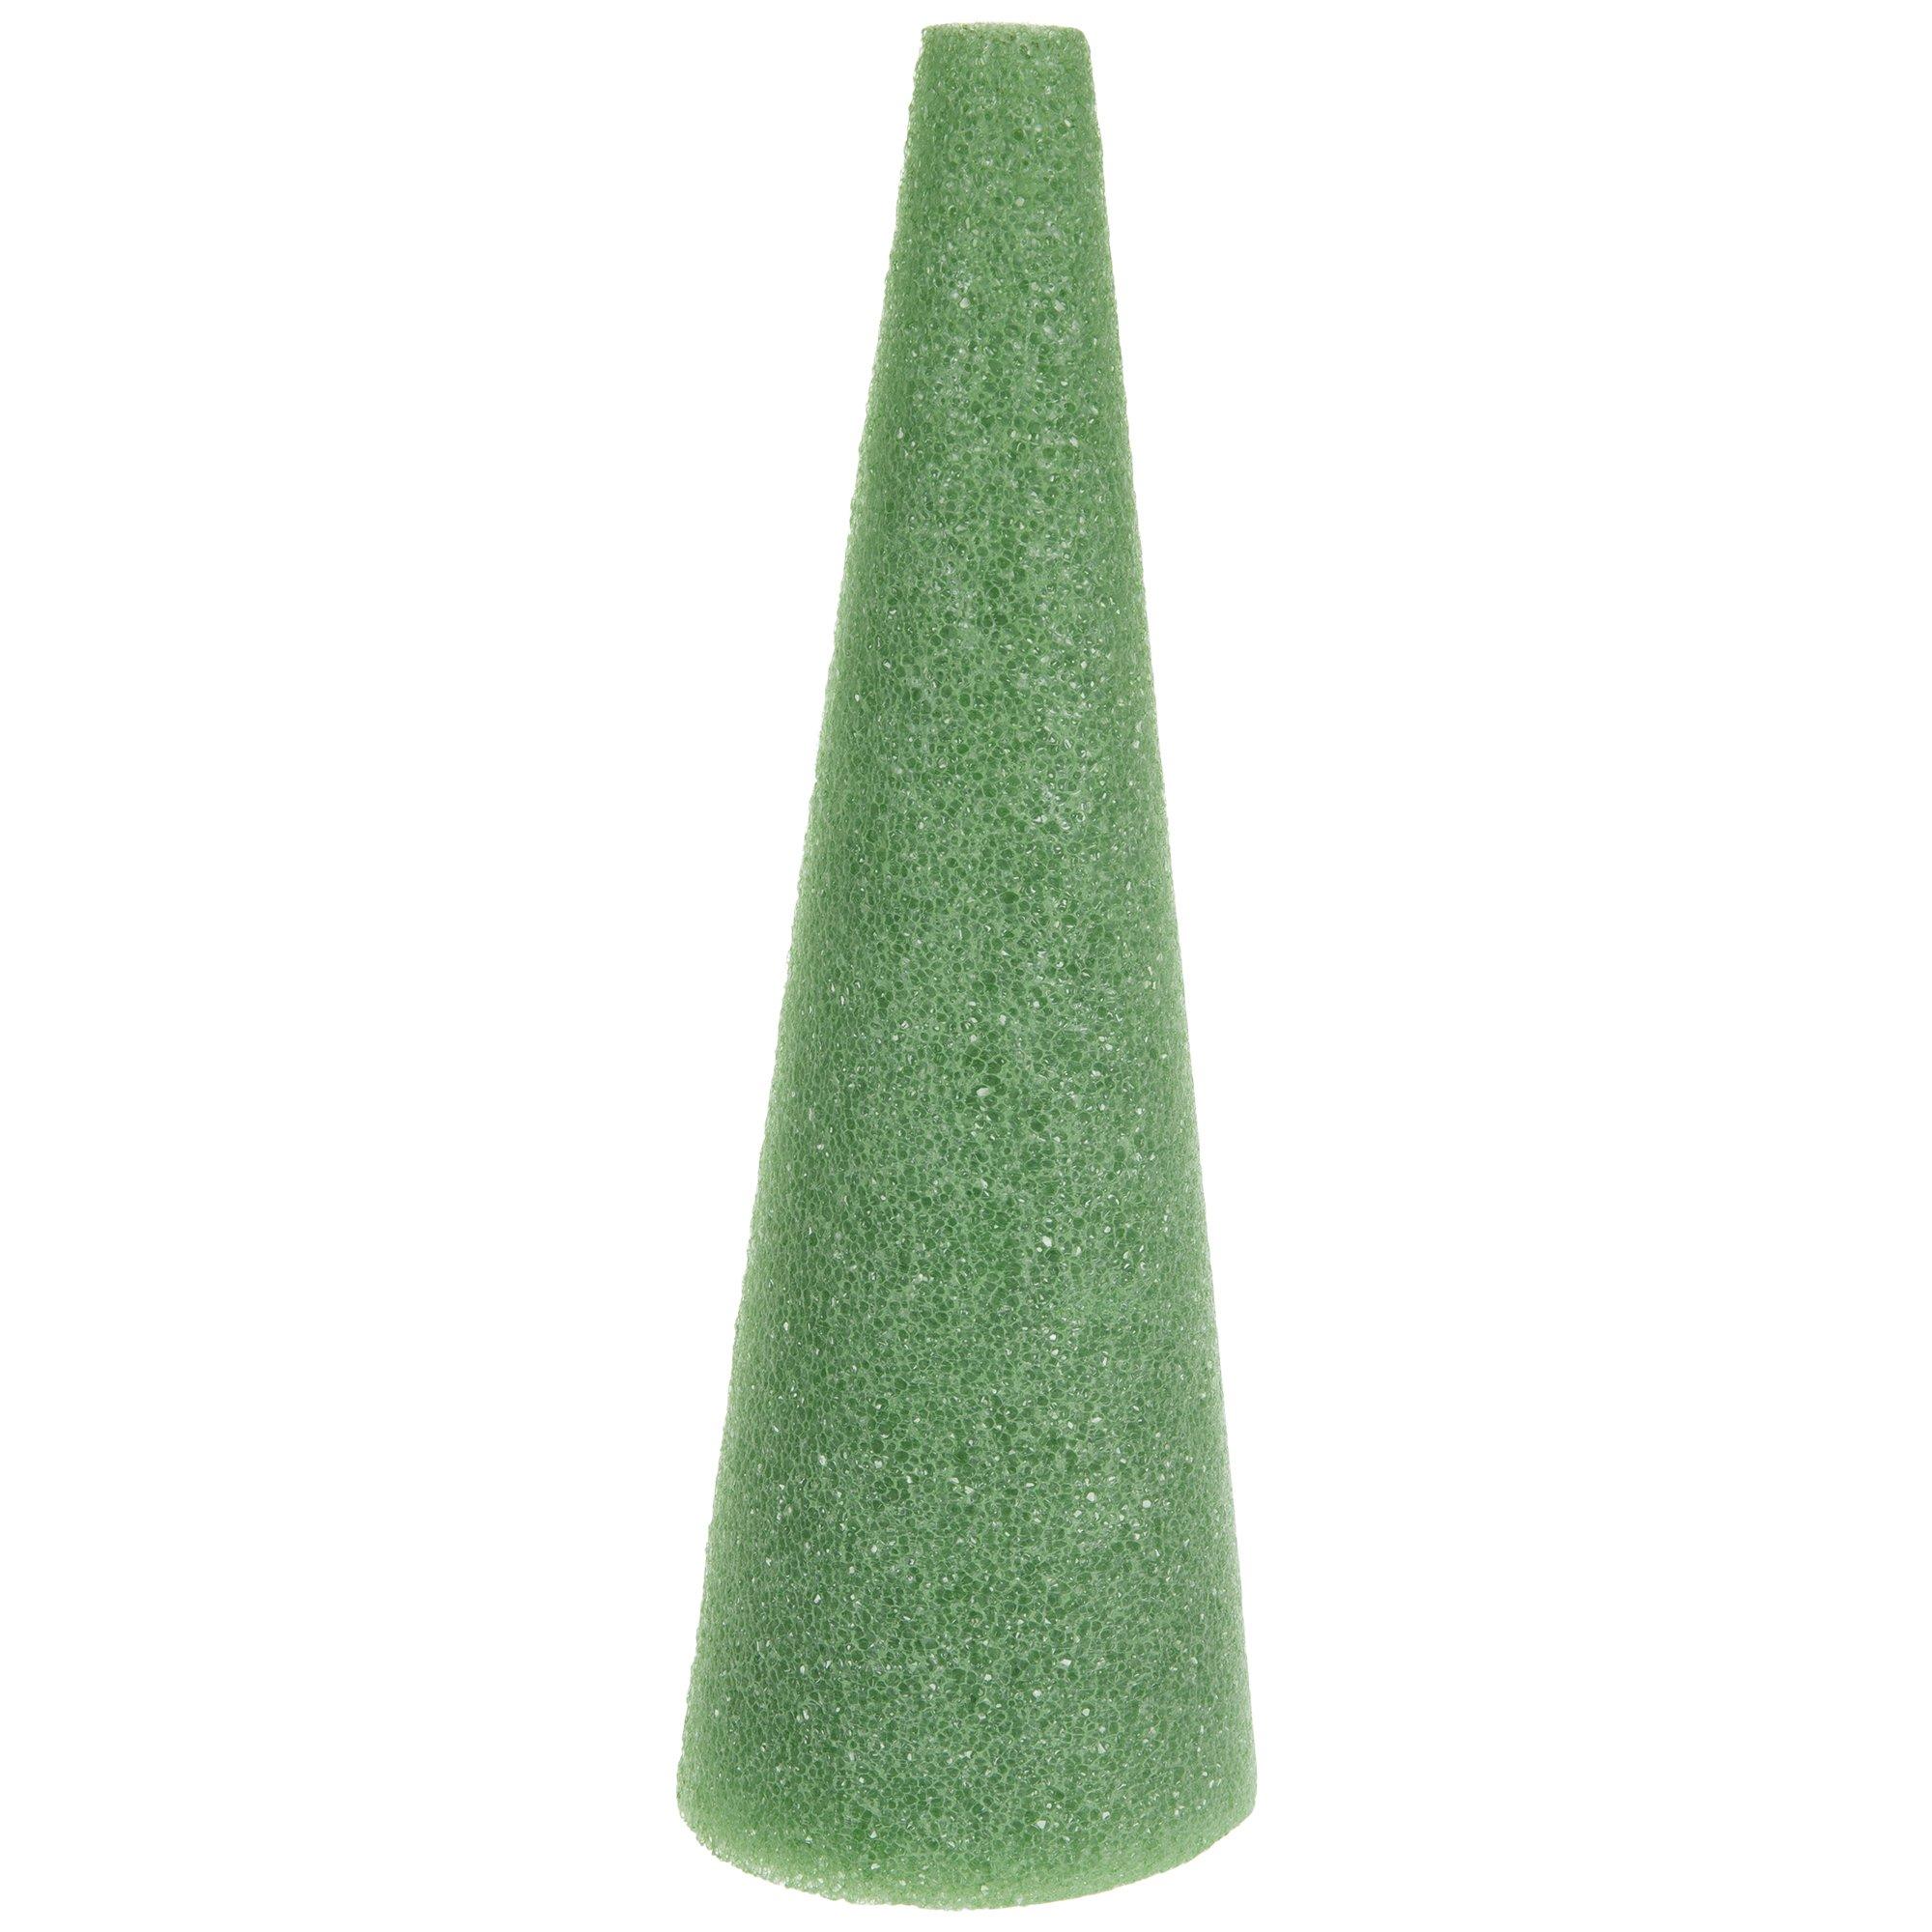 Green Styrofoam Cone, Dry Floral Foam Cones 6 inches, Styrofoam Cones for  Crafts, Artificial Flowers and Cemetery vases, Each Craft Cone Measures 6  x 2.75 - 4 Pack. : : Arts & Crafts